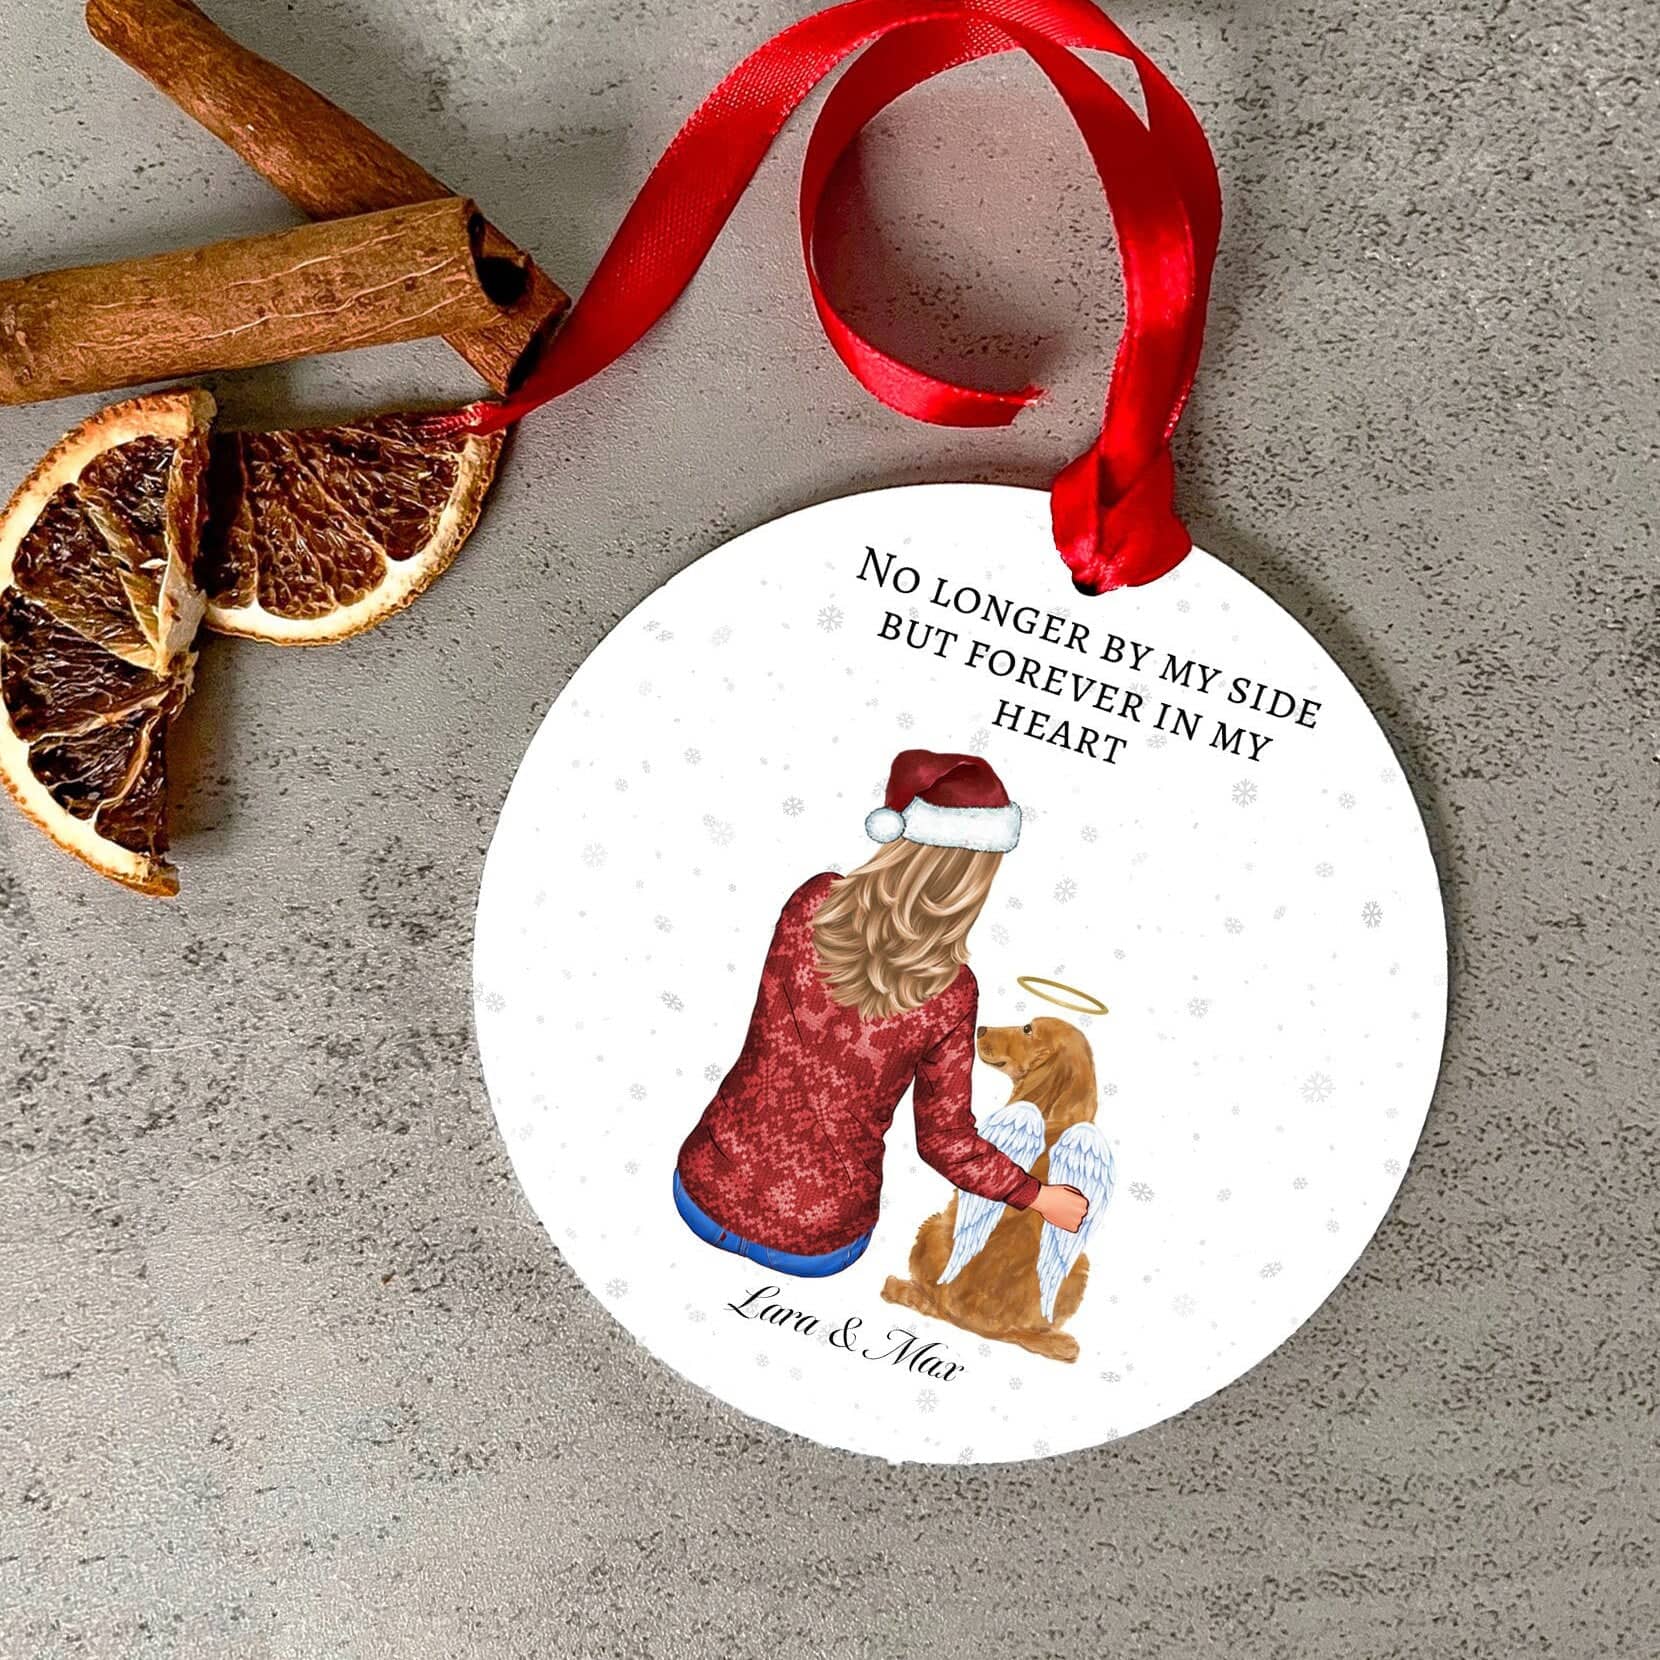 Pet memorial christmas bauble, Custom girl and pet portrait, No longer by my side dog remembrance ornament, Pet sympathy gift, Cat death, hanging tree decor, Angel wings rainbow bridge